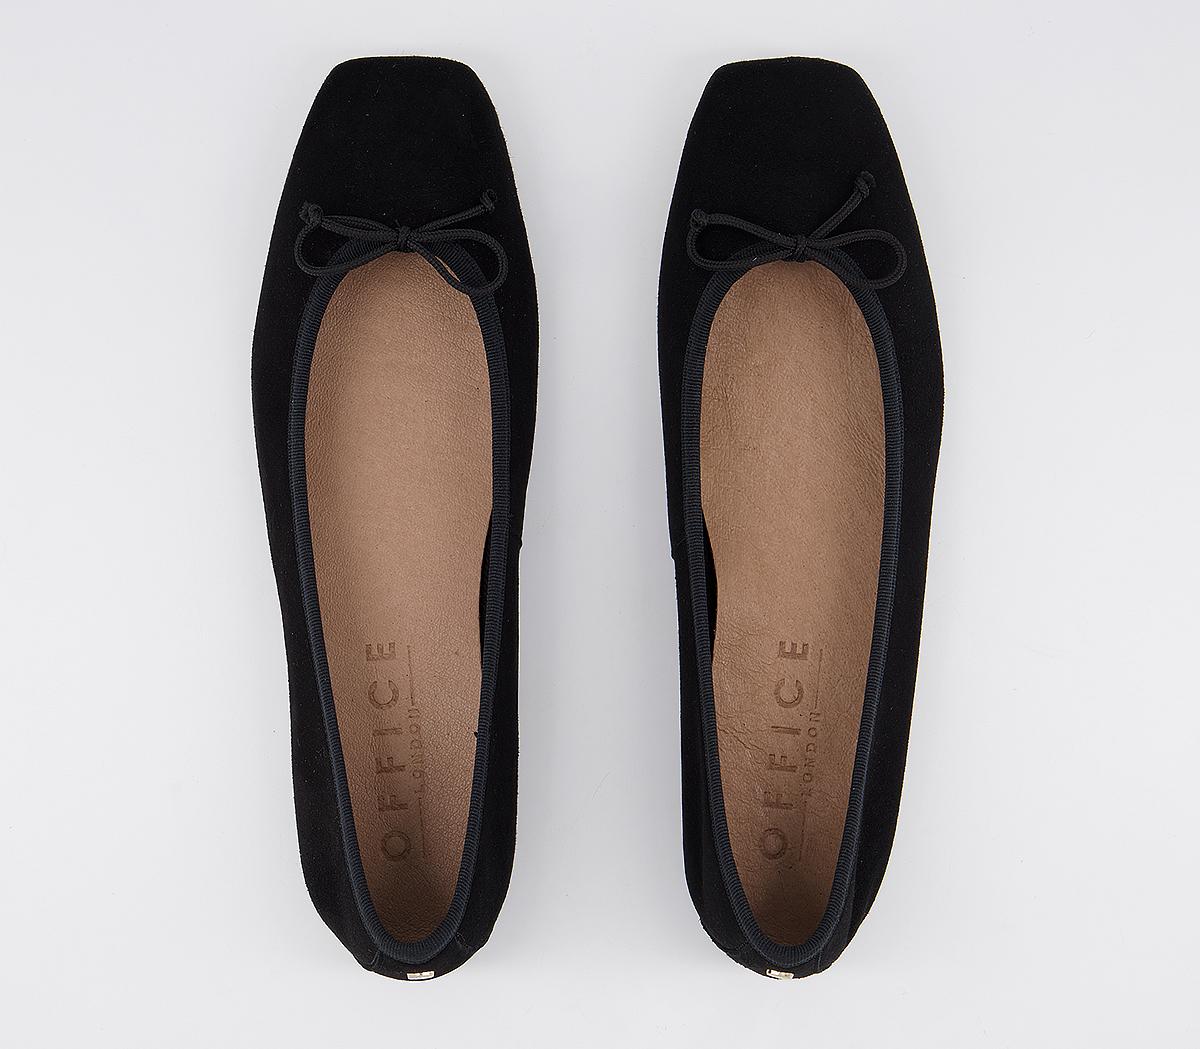 Office Fly Away Square Toe Bow Ballerina Flats Black Suede Flat Shoes